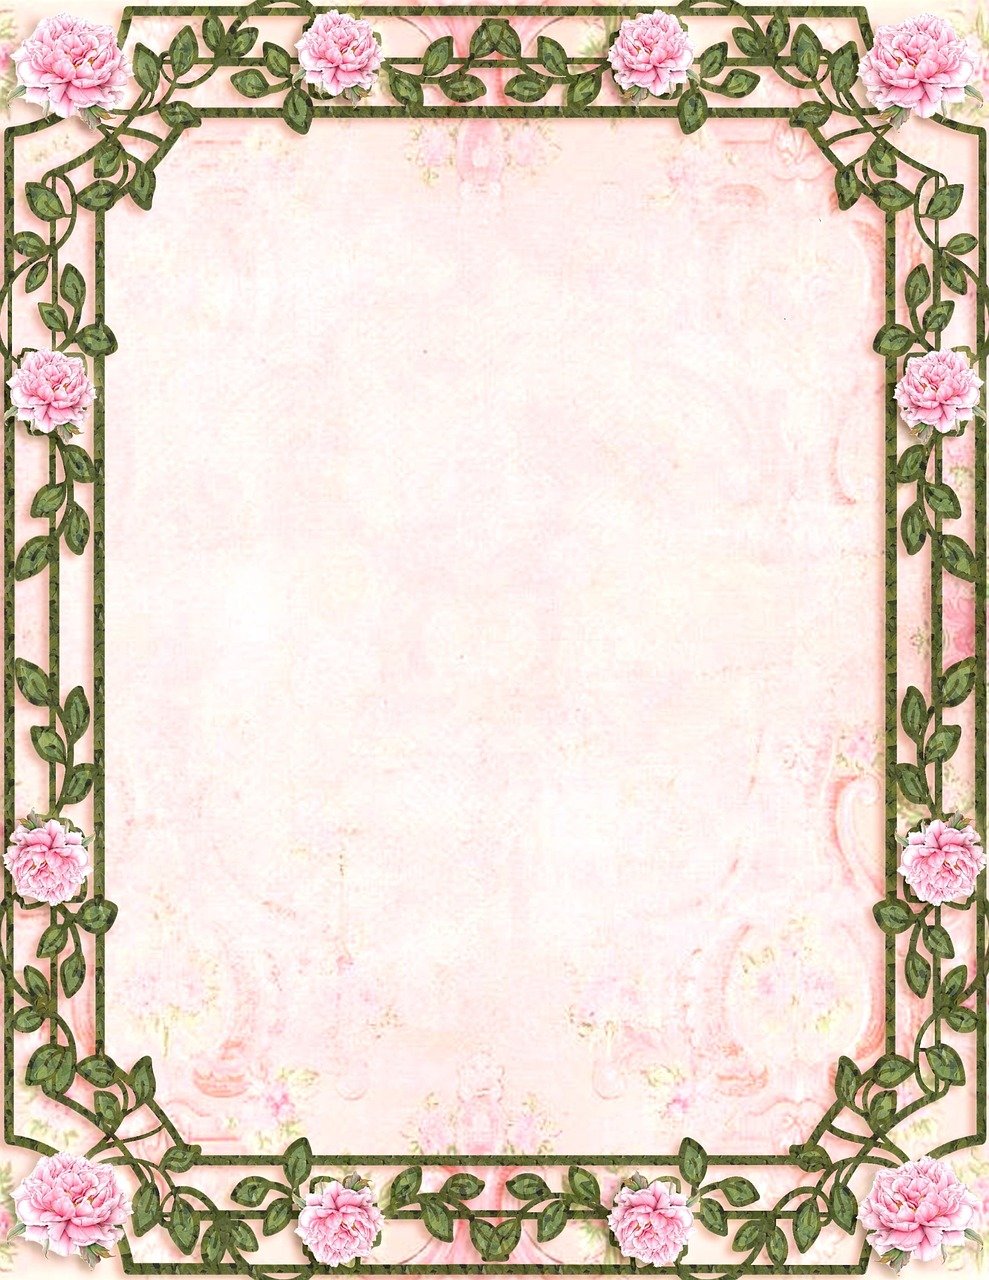 a floral frame with pink roses on white paper